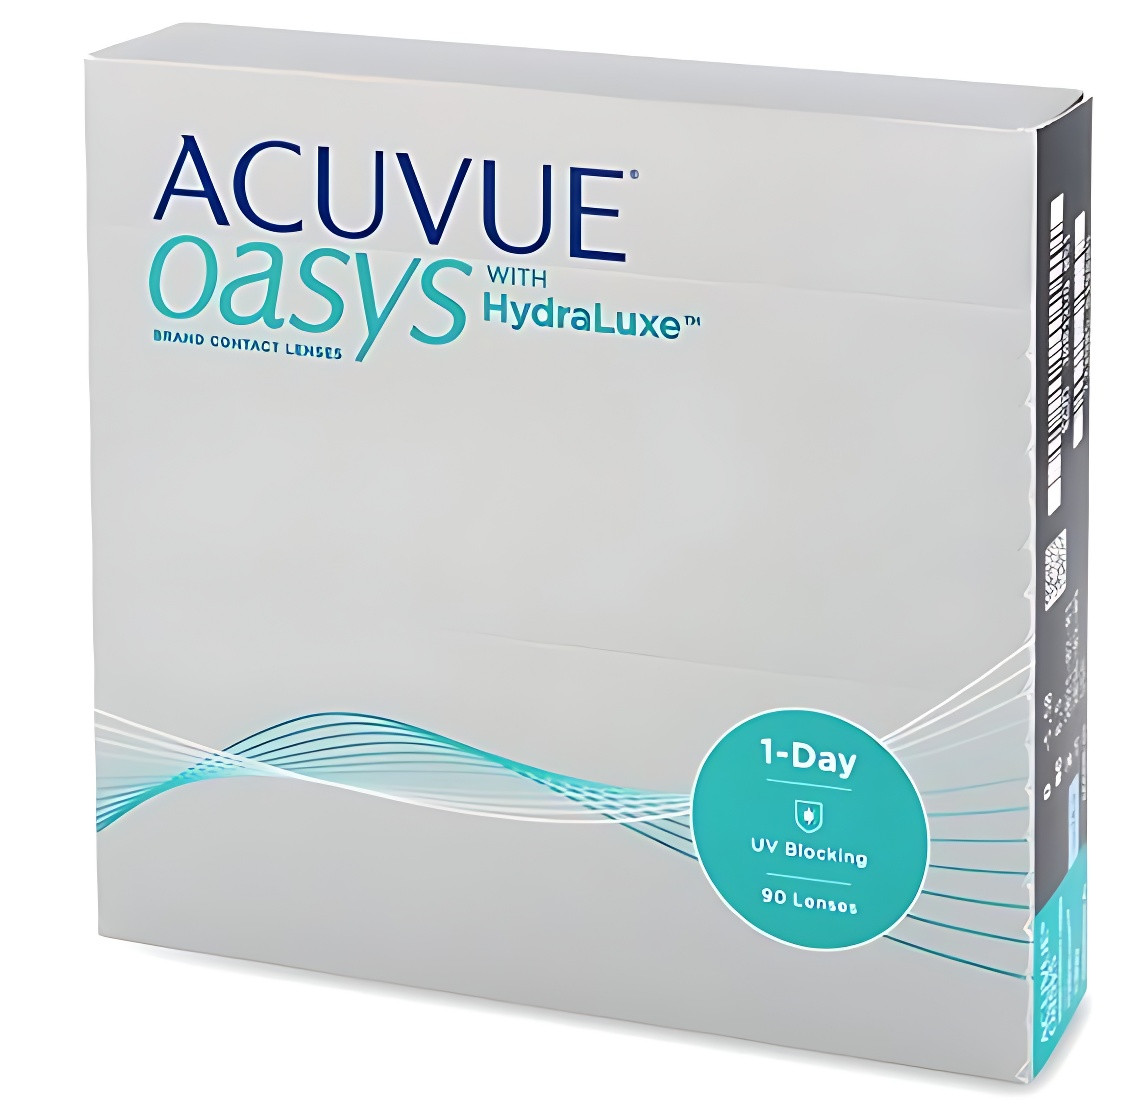 ACUVUE OASYS® 1-DAY WITH HYDRALUXE, 90 PACK